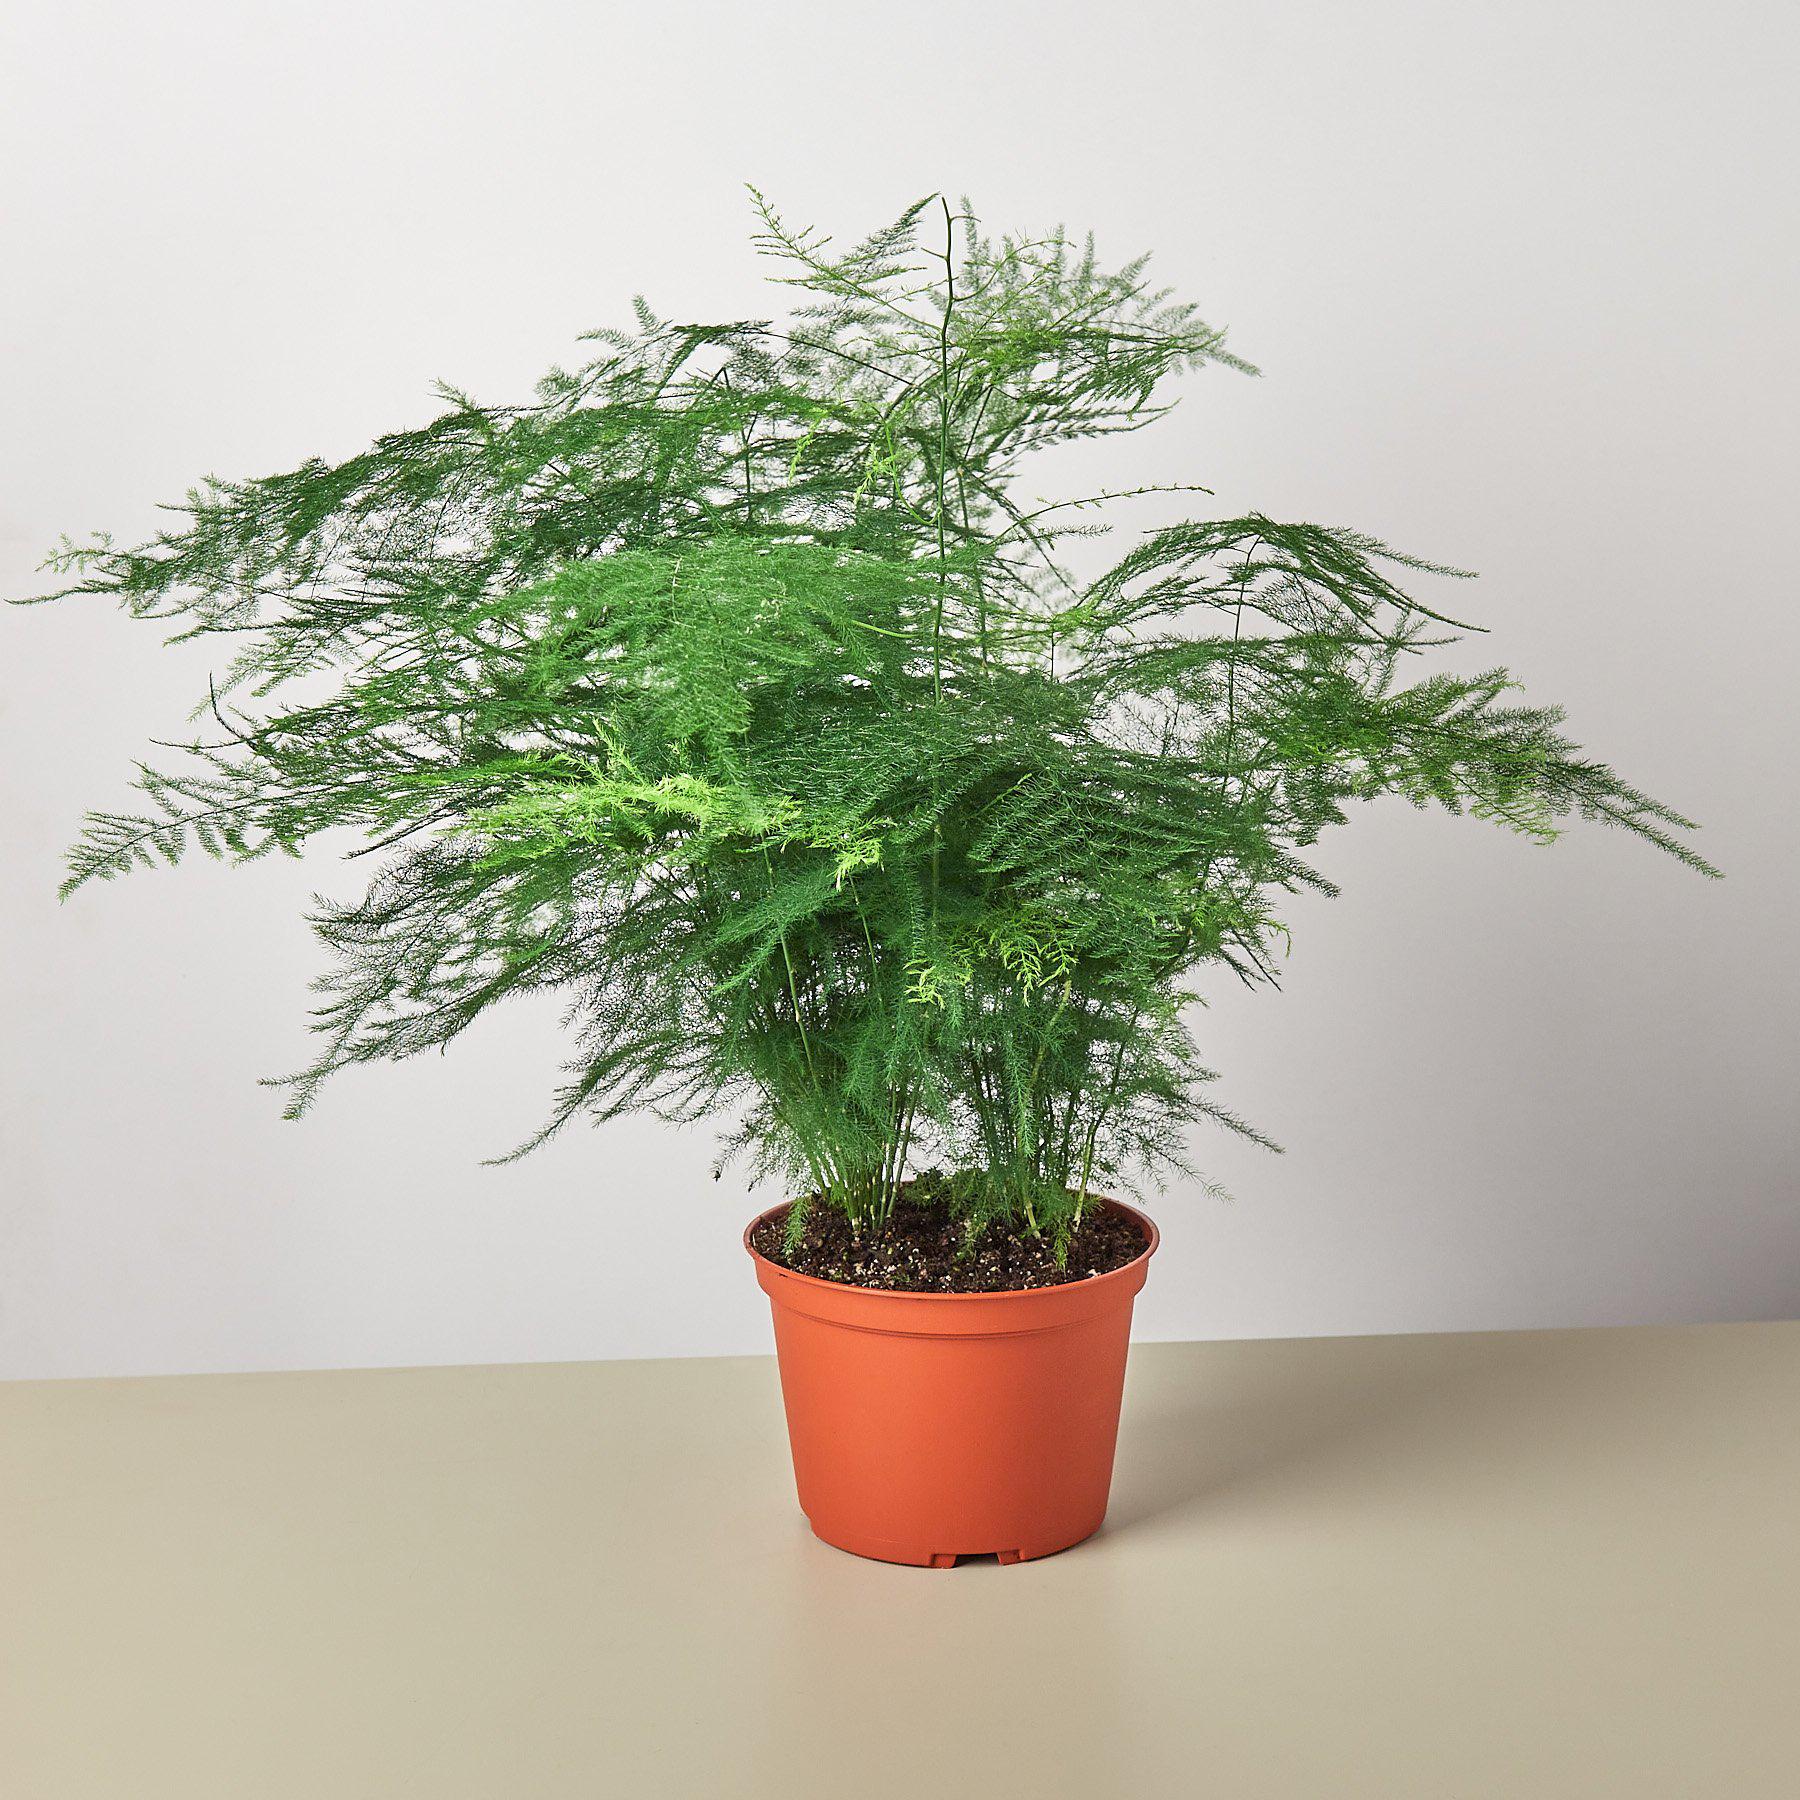 How to Grow and Care for Asparagus Fern